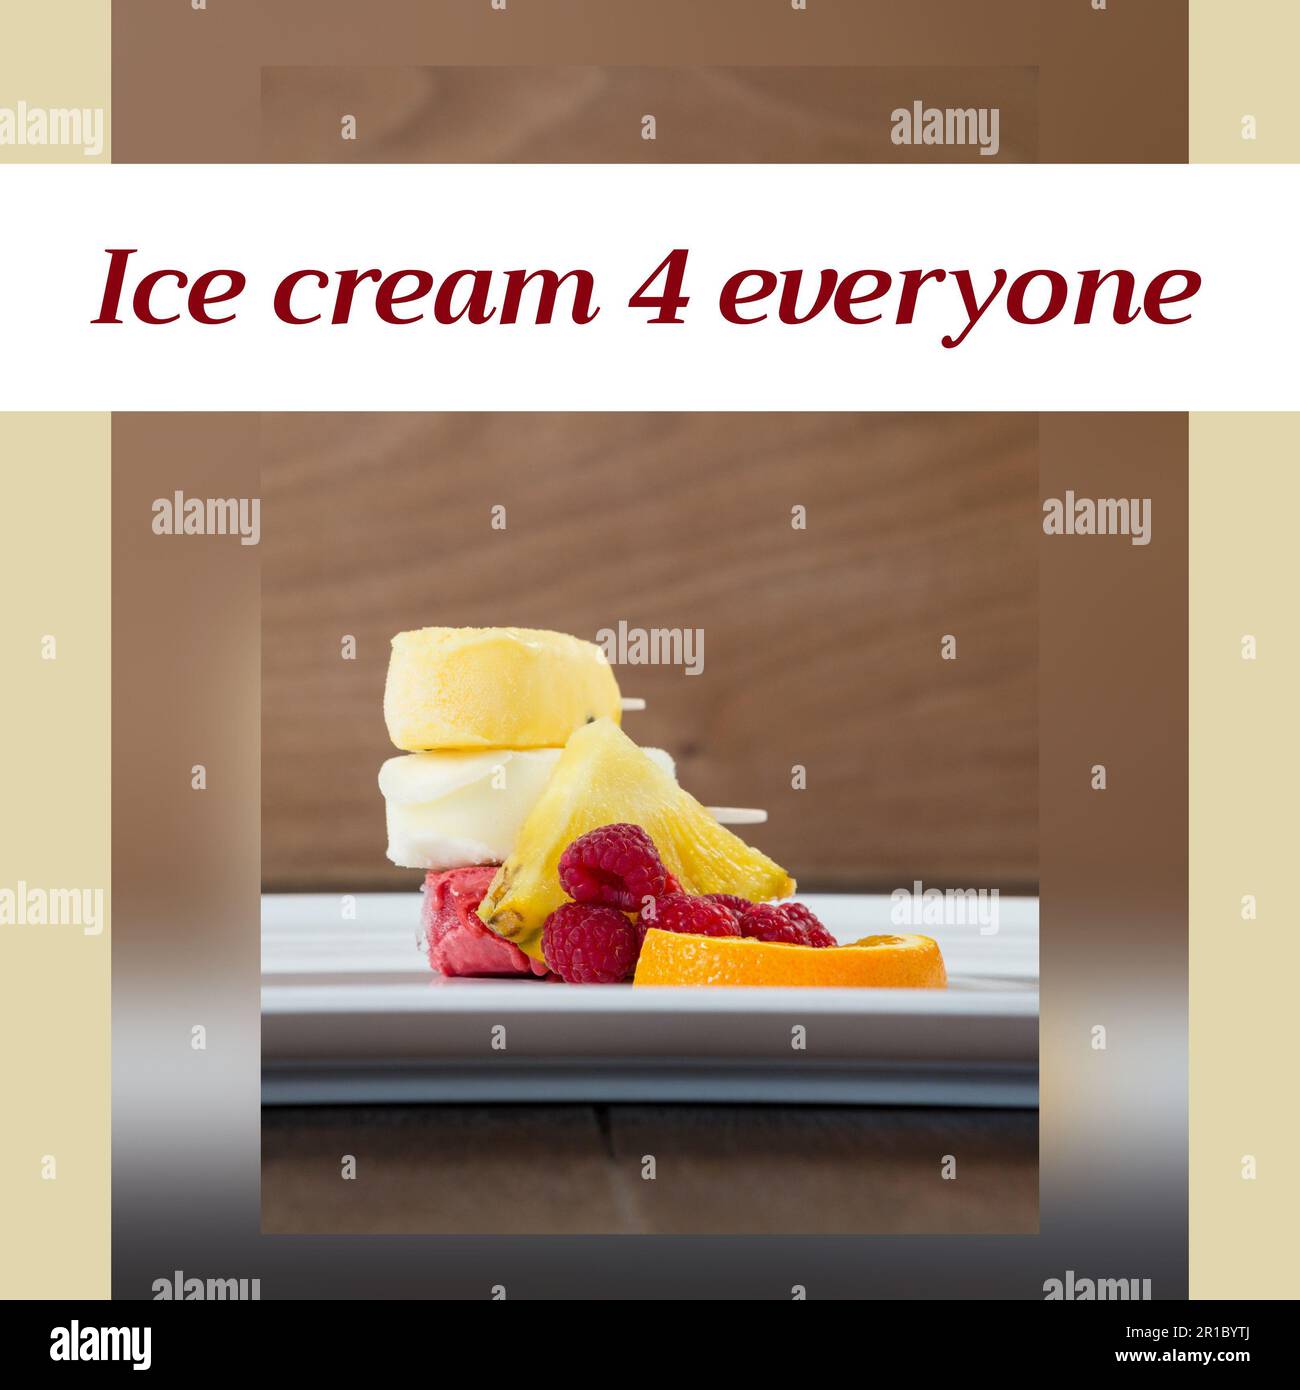 Composition of happy ice cream day text over fruit and ice cream Stock Photo